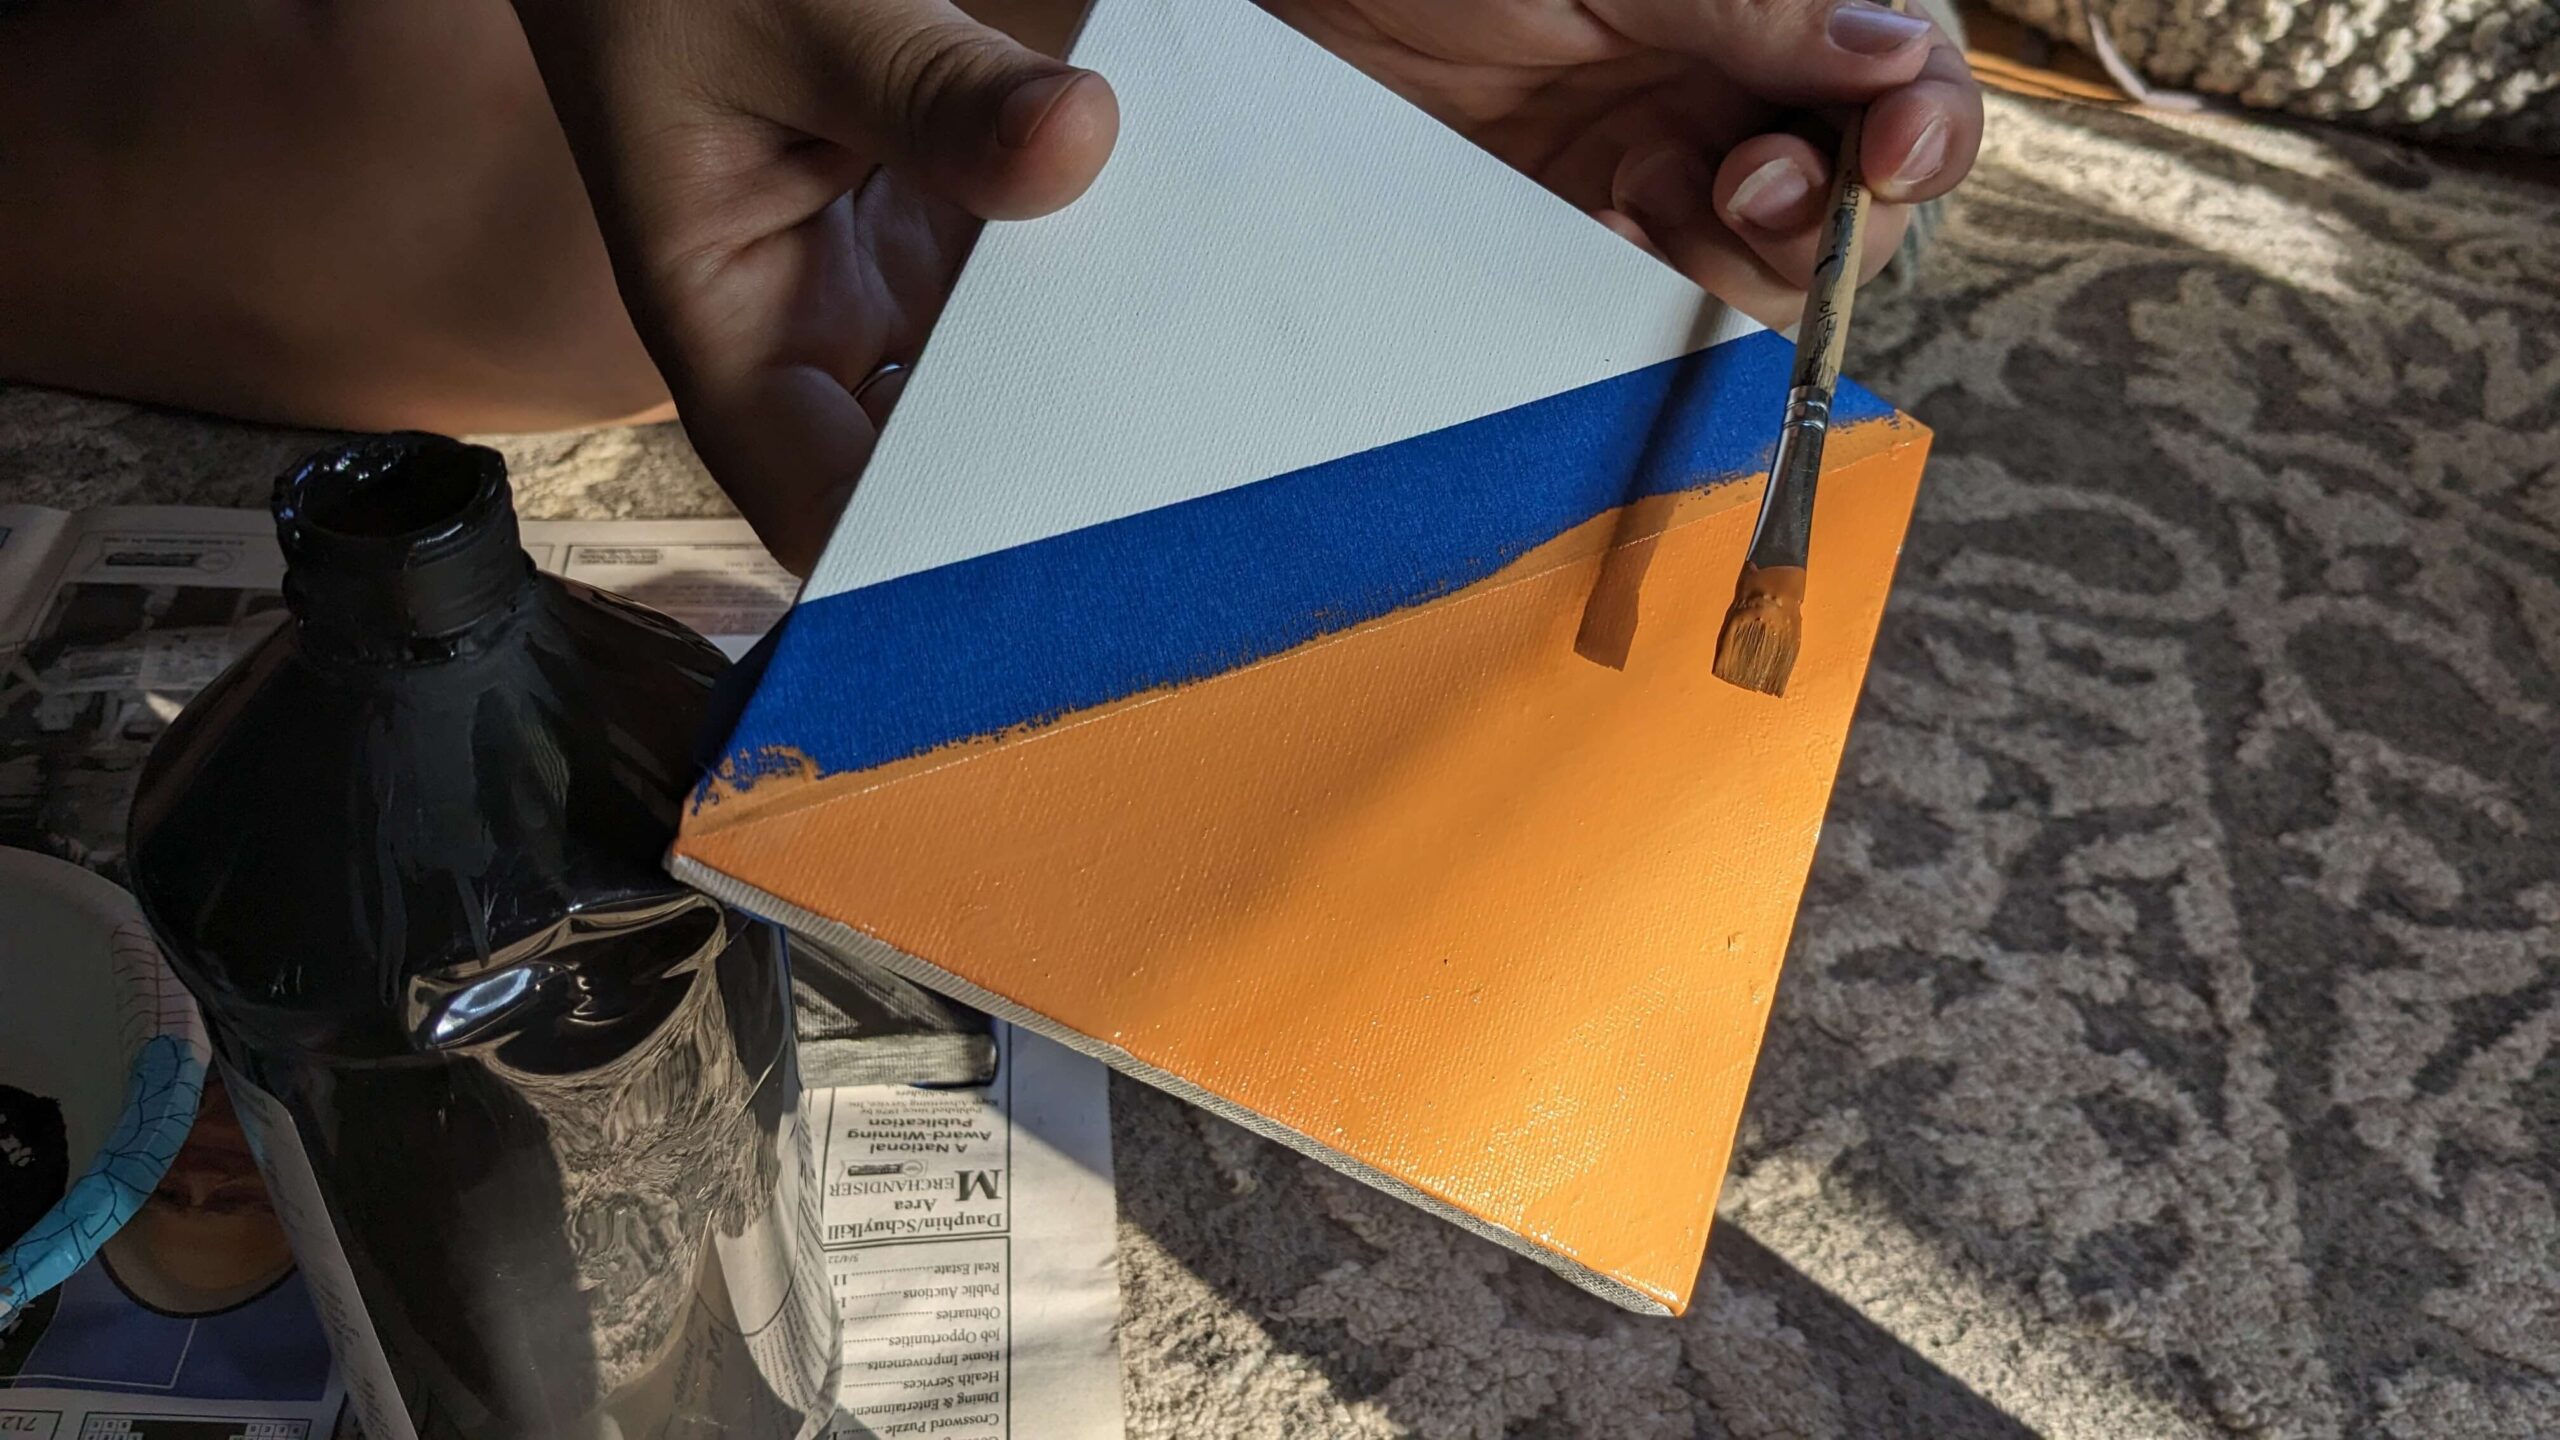 woman holding a square canvas with a diagonal blue painters tape strip and one half painted orange and holding a paintbrush